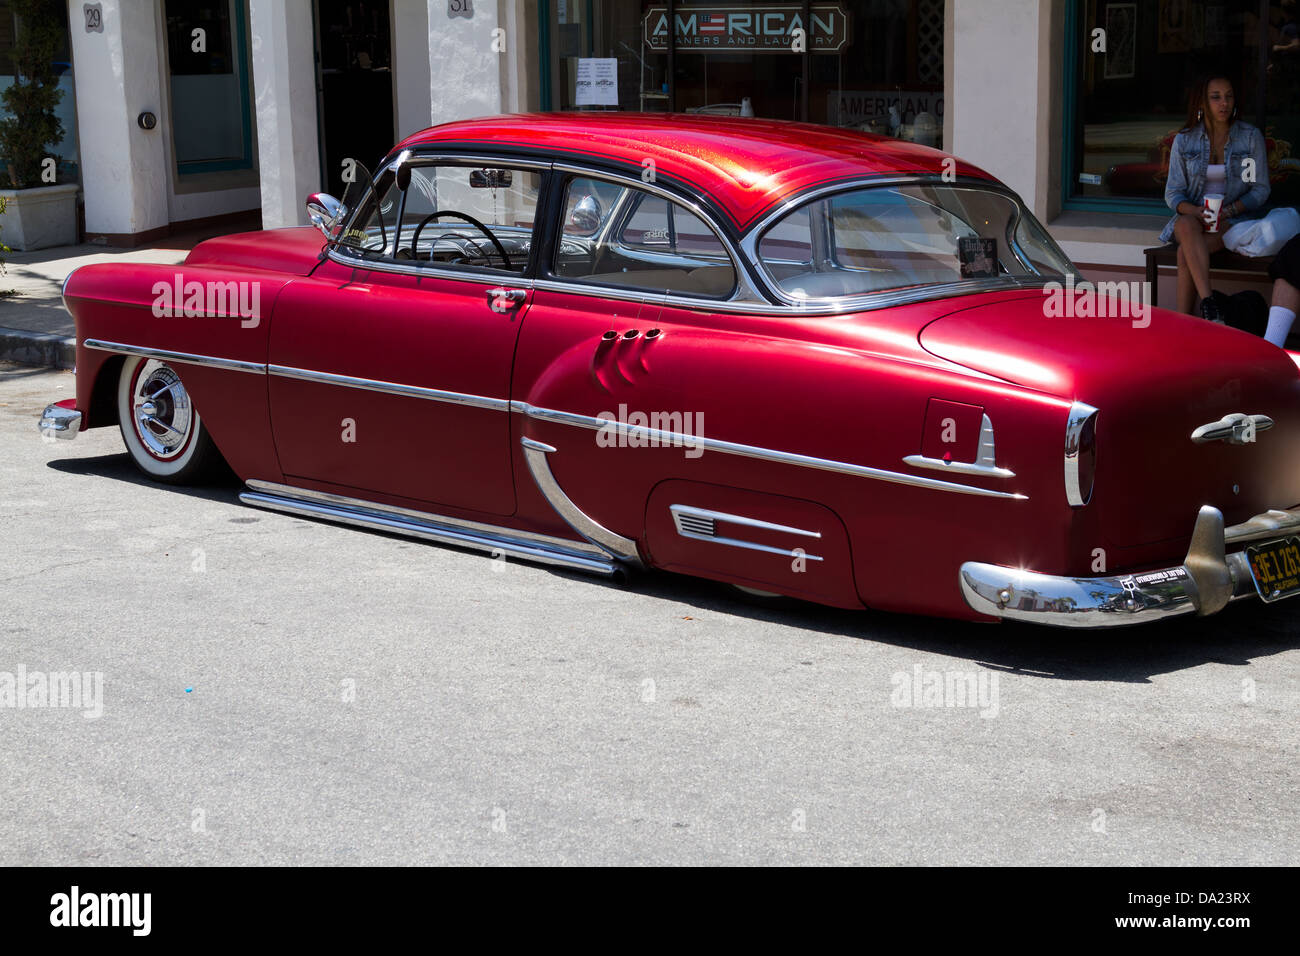 Customized 1953 Chevrolet parked  on the street Stock Photo